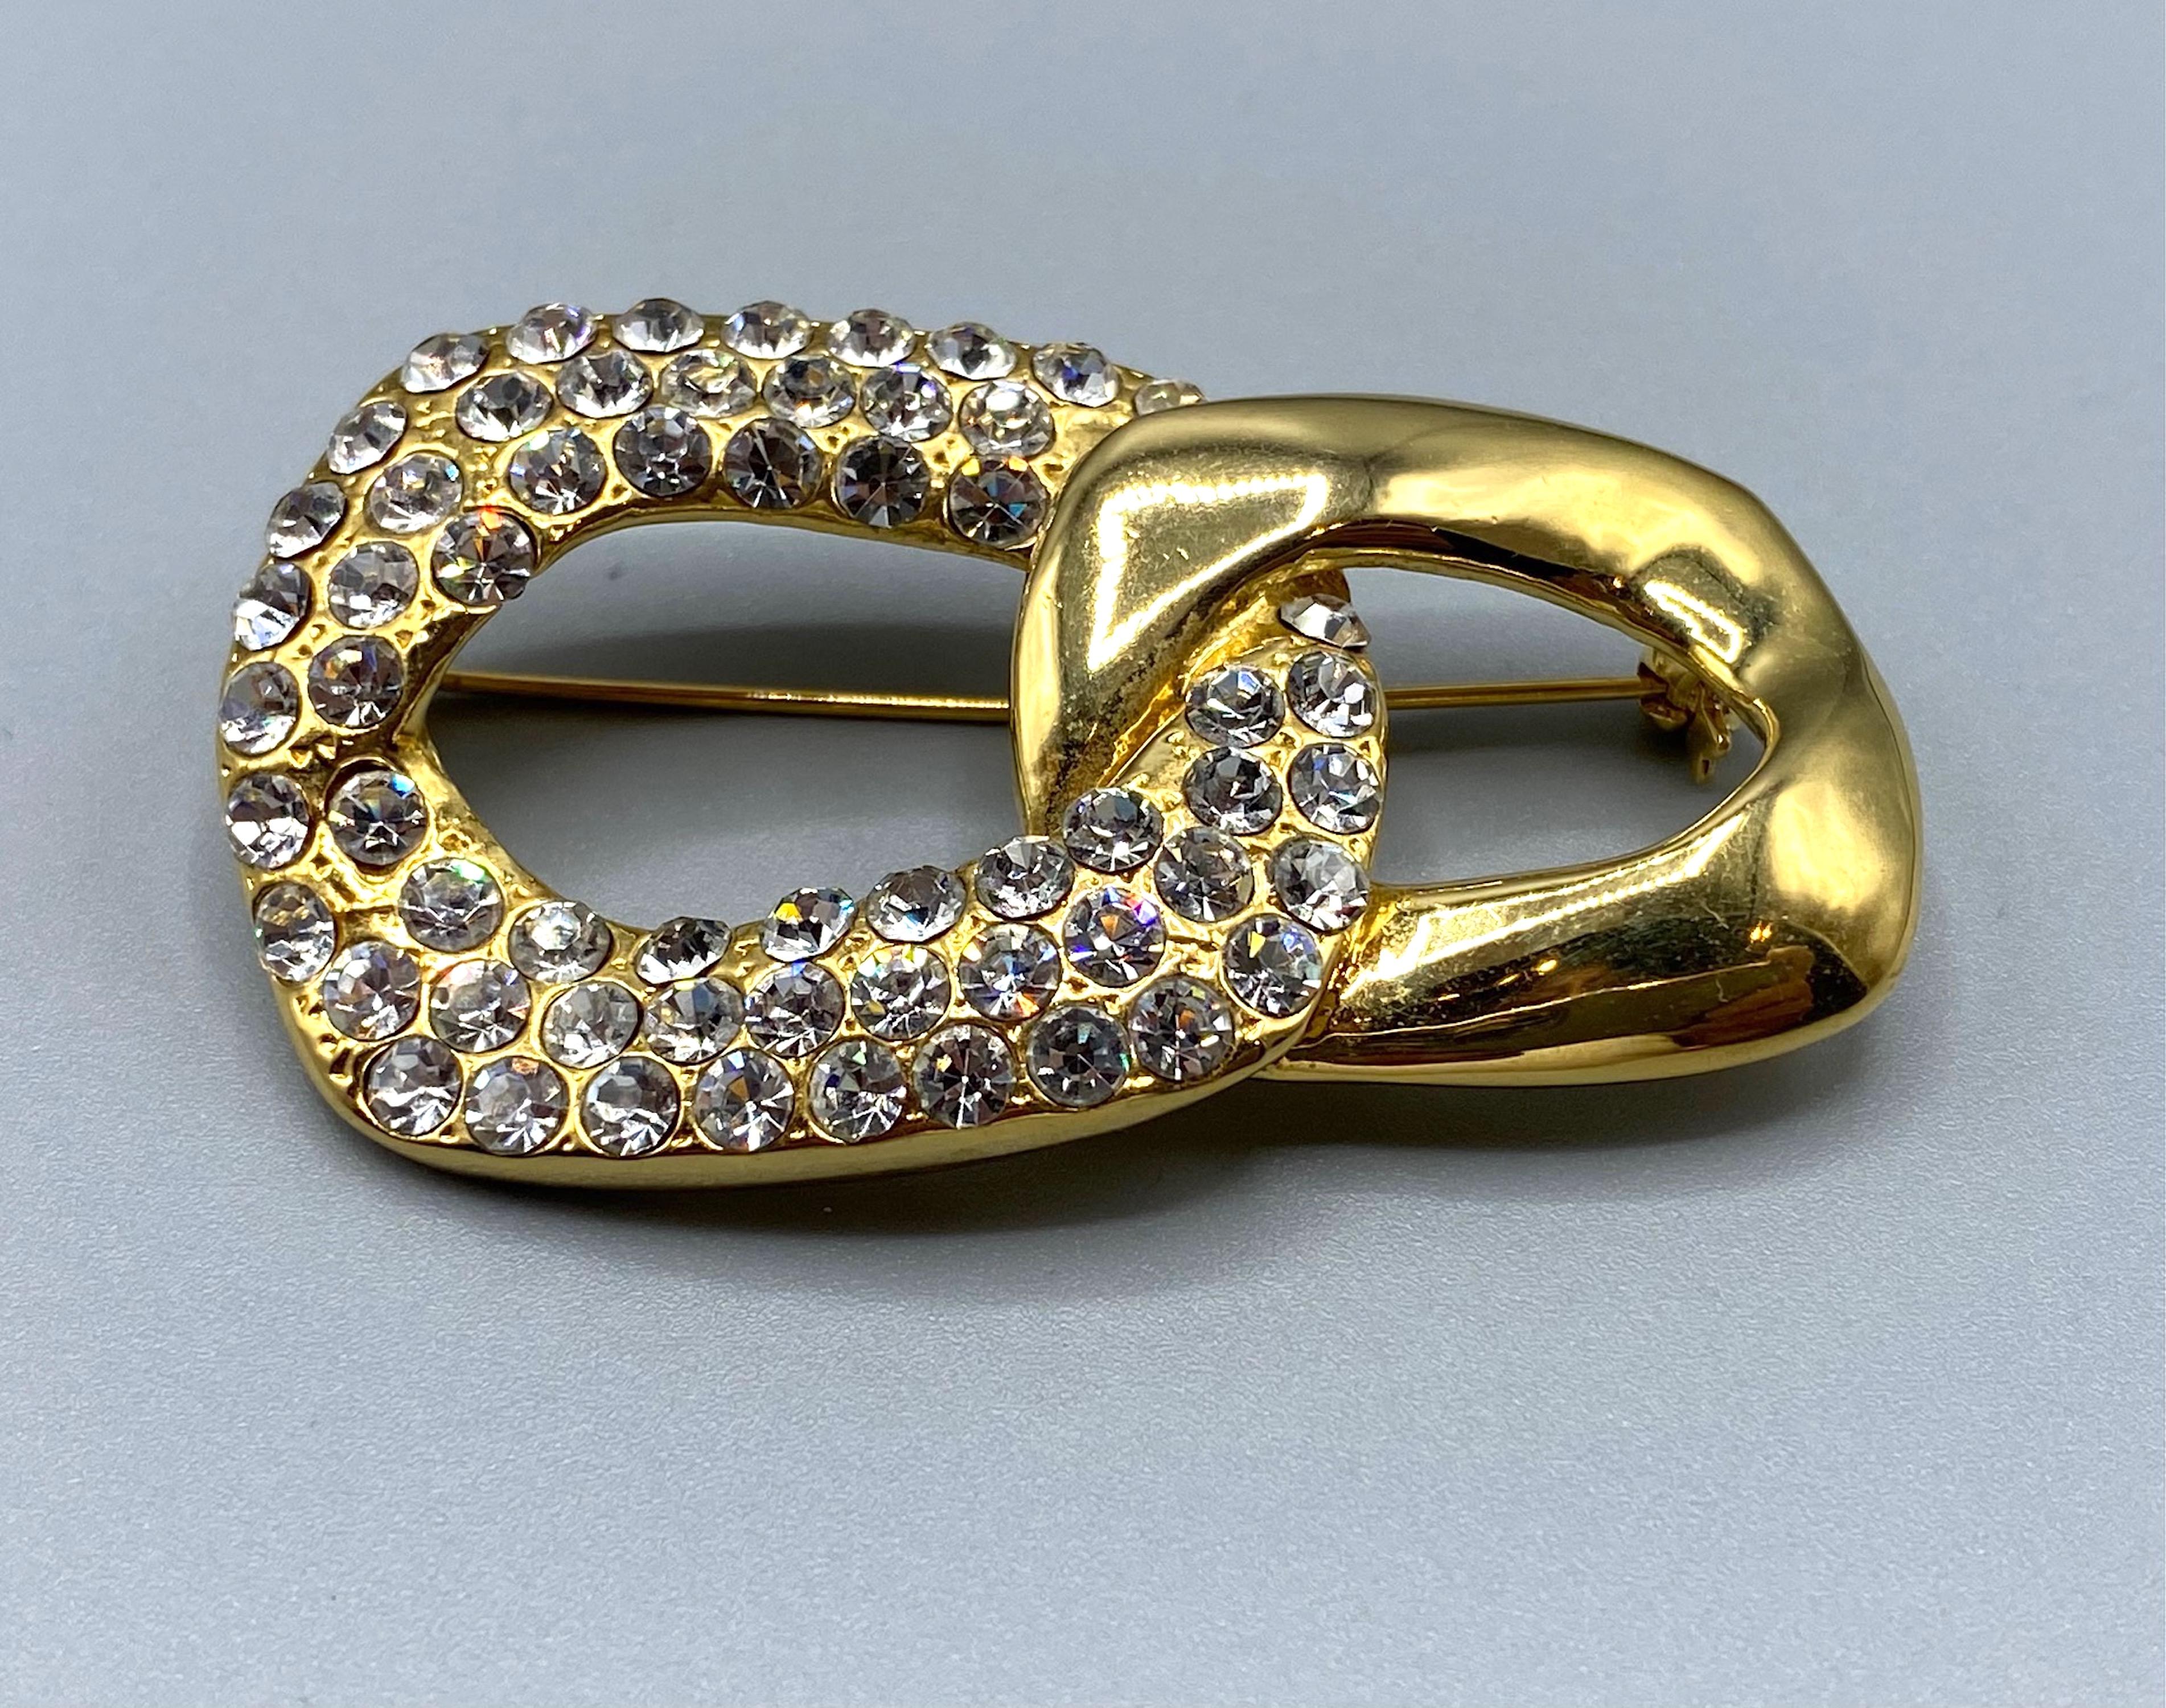 Yves Saint Laurent 1980s Gold & Rhinestone Link Brooch In Good Condition For Sale In New York, NY